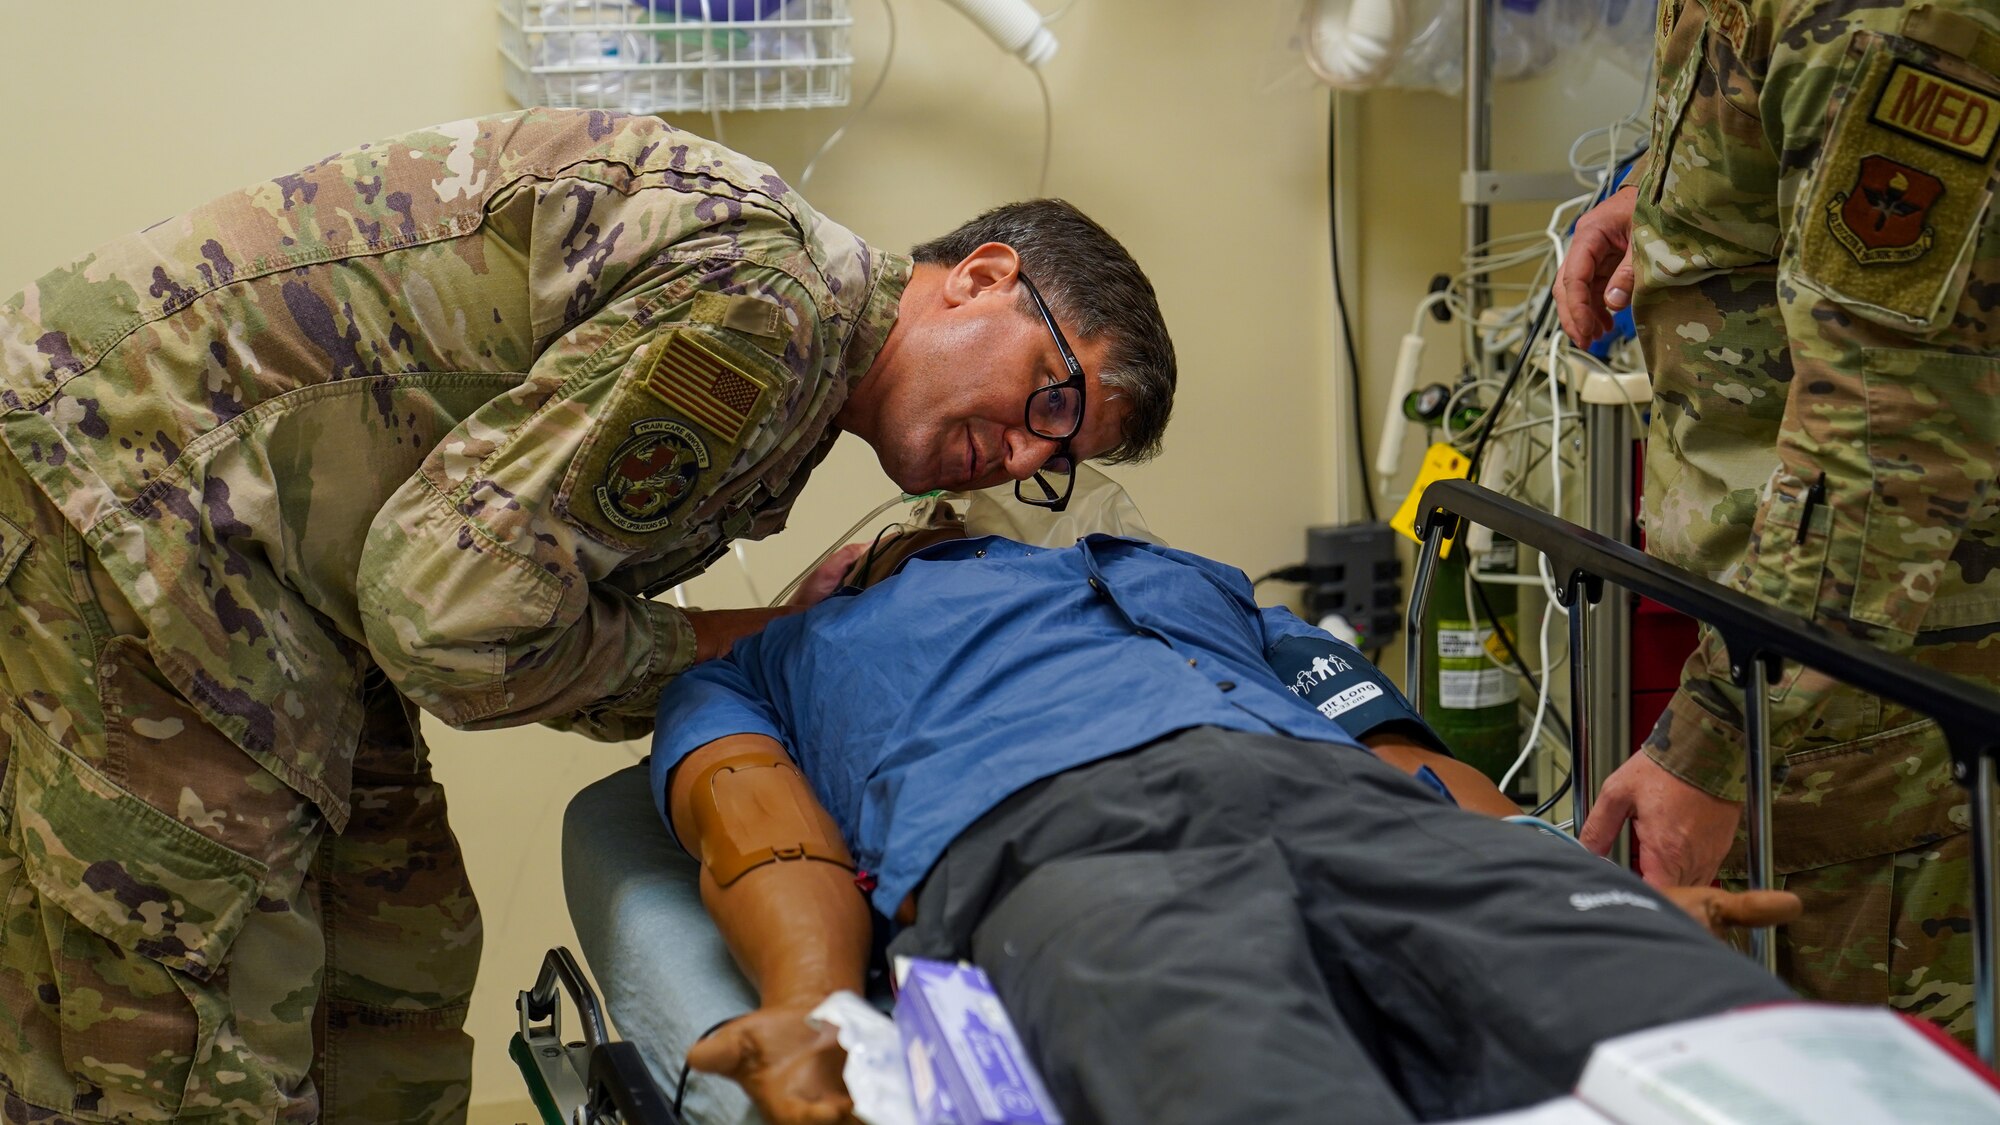 U.S. Air Force Lt. Col. Blake Elkins, 81st Healthcare Operations Squadron endocrinologist, checks a training mannequin for breathing sounds in the Advanced Life Support Course in the simulation lab at the Keesler Medical Center on Keesler Air Force Base, Mississippi, May 17, 2023.